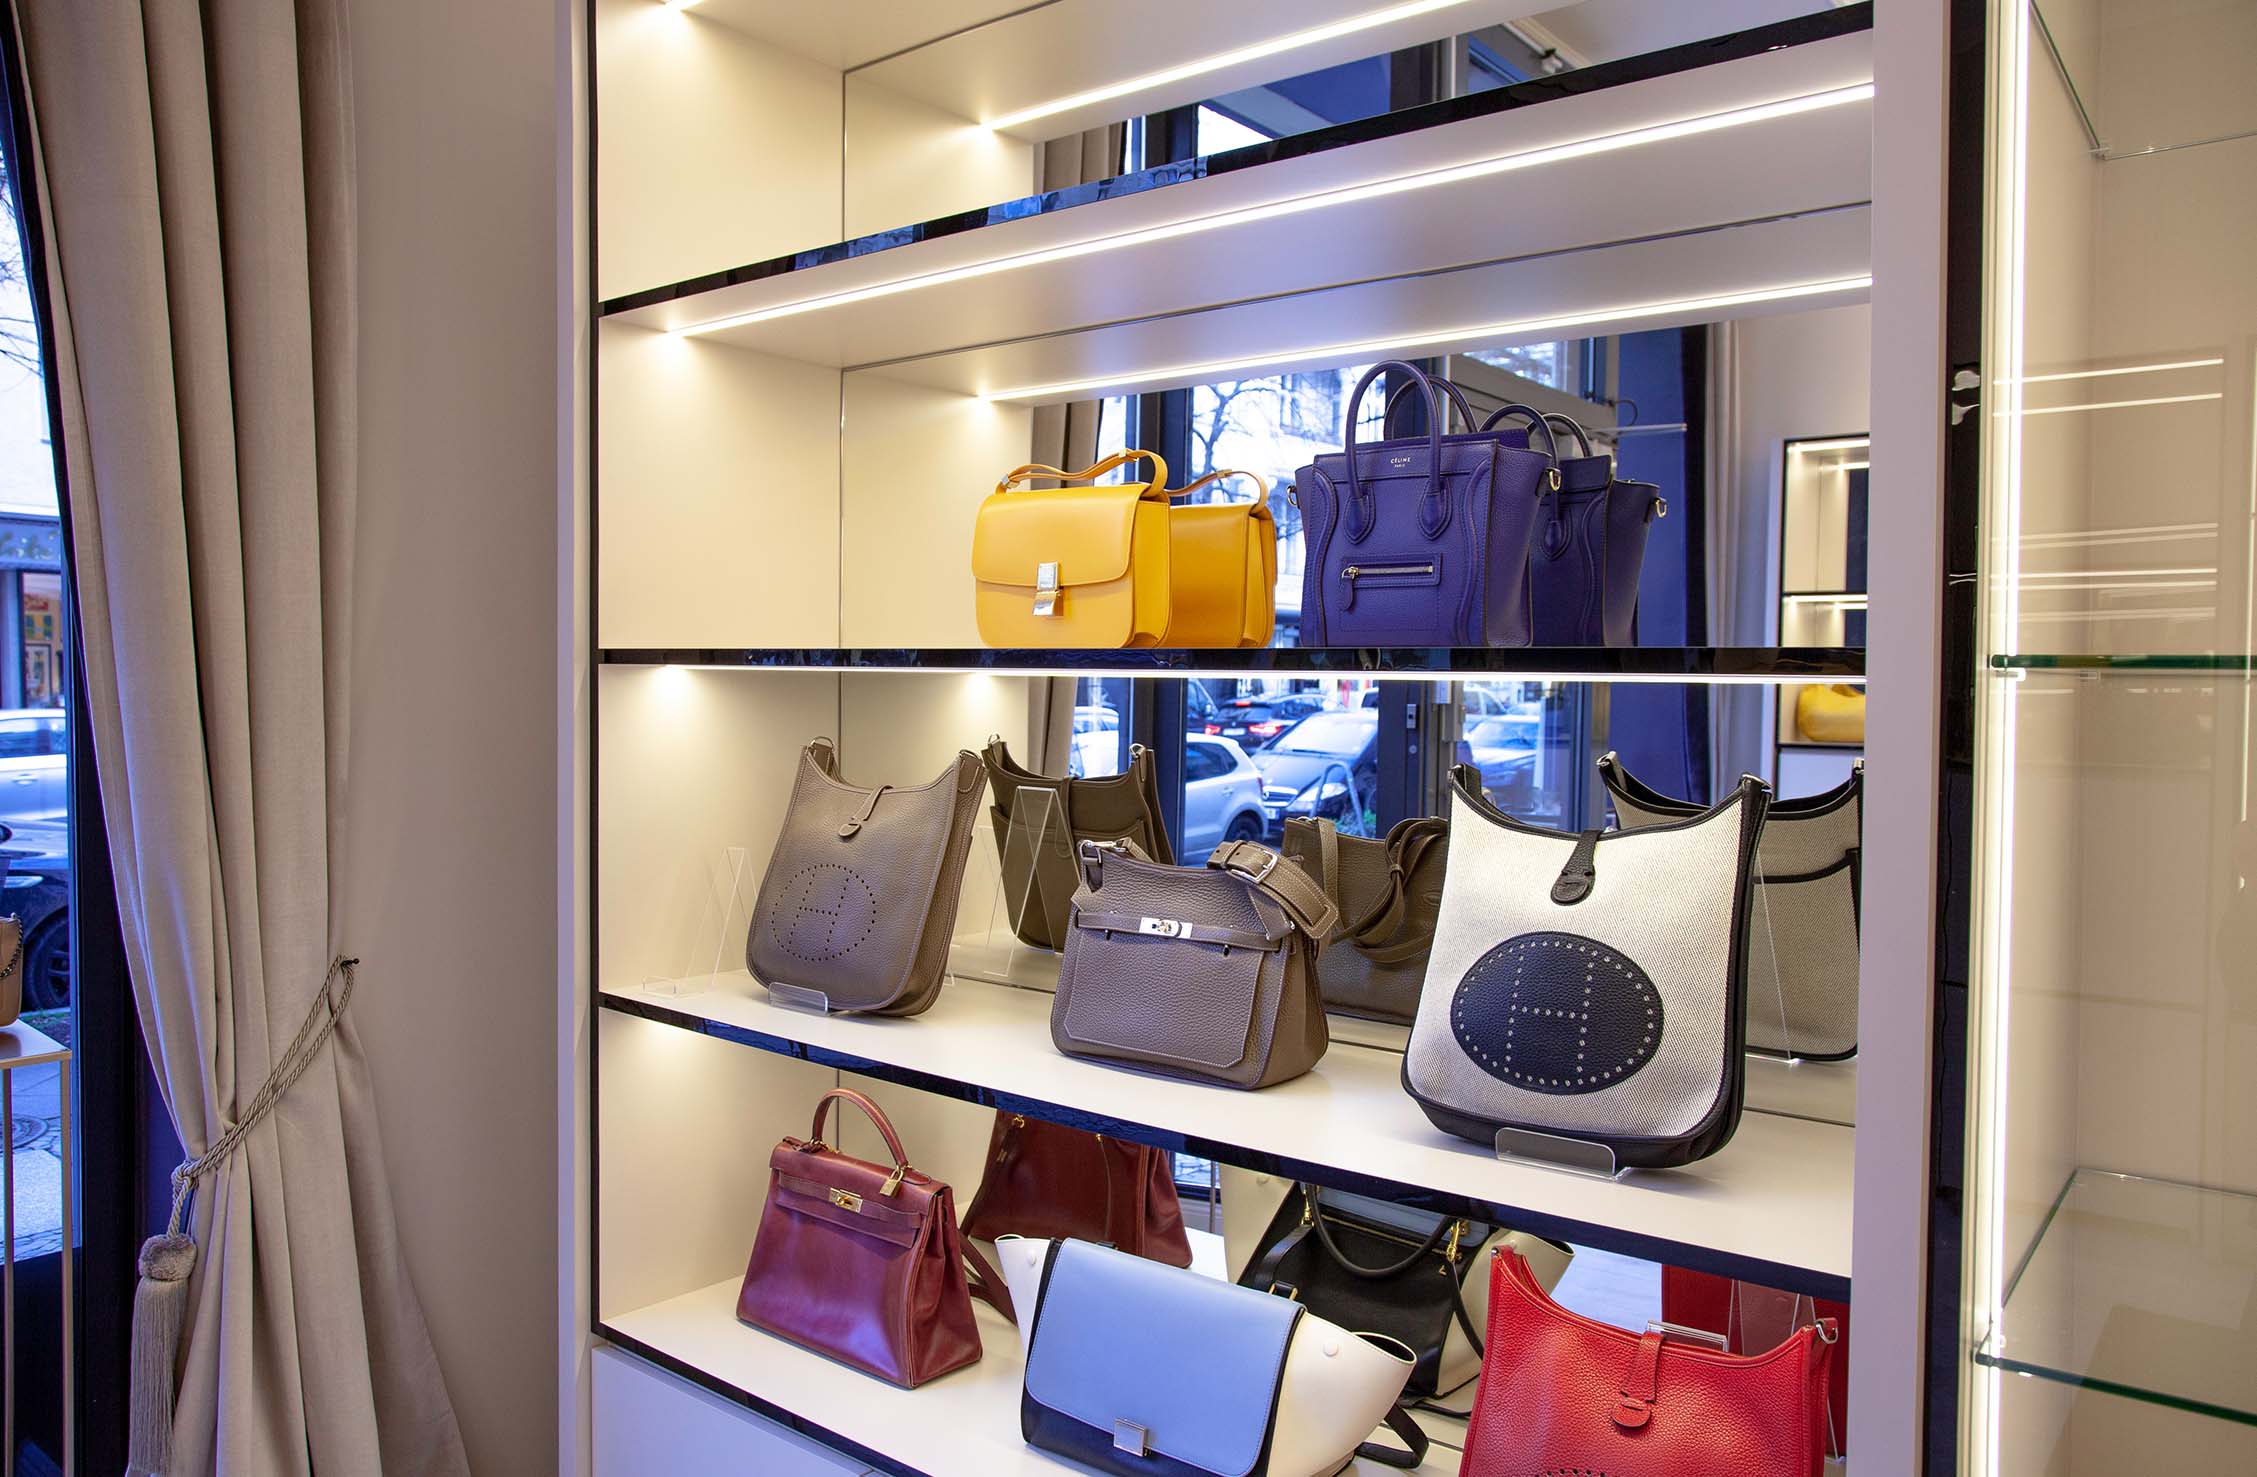 A Spa to pamper your luxury bags at the Bon Marché Rive Gauche